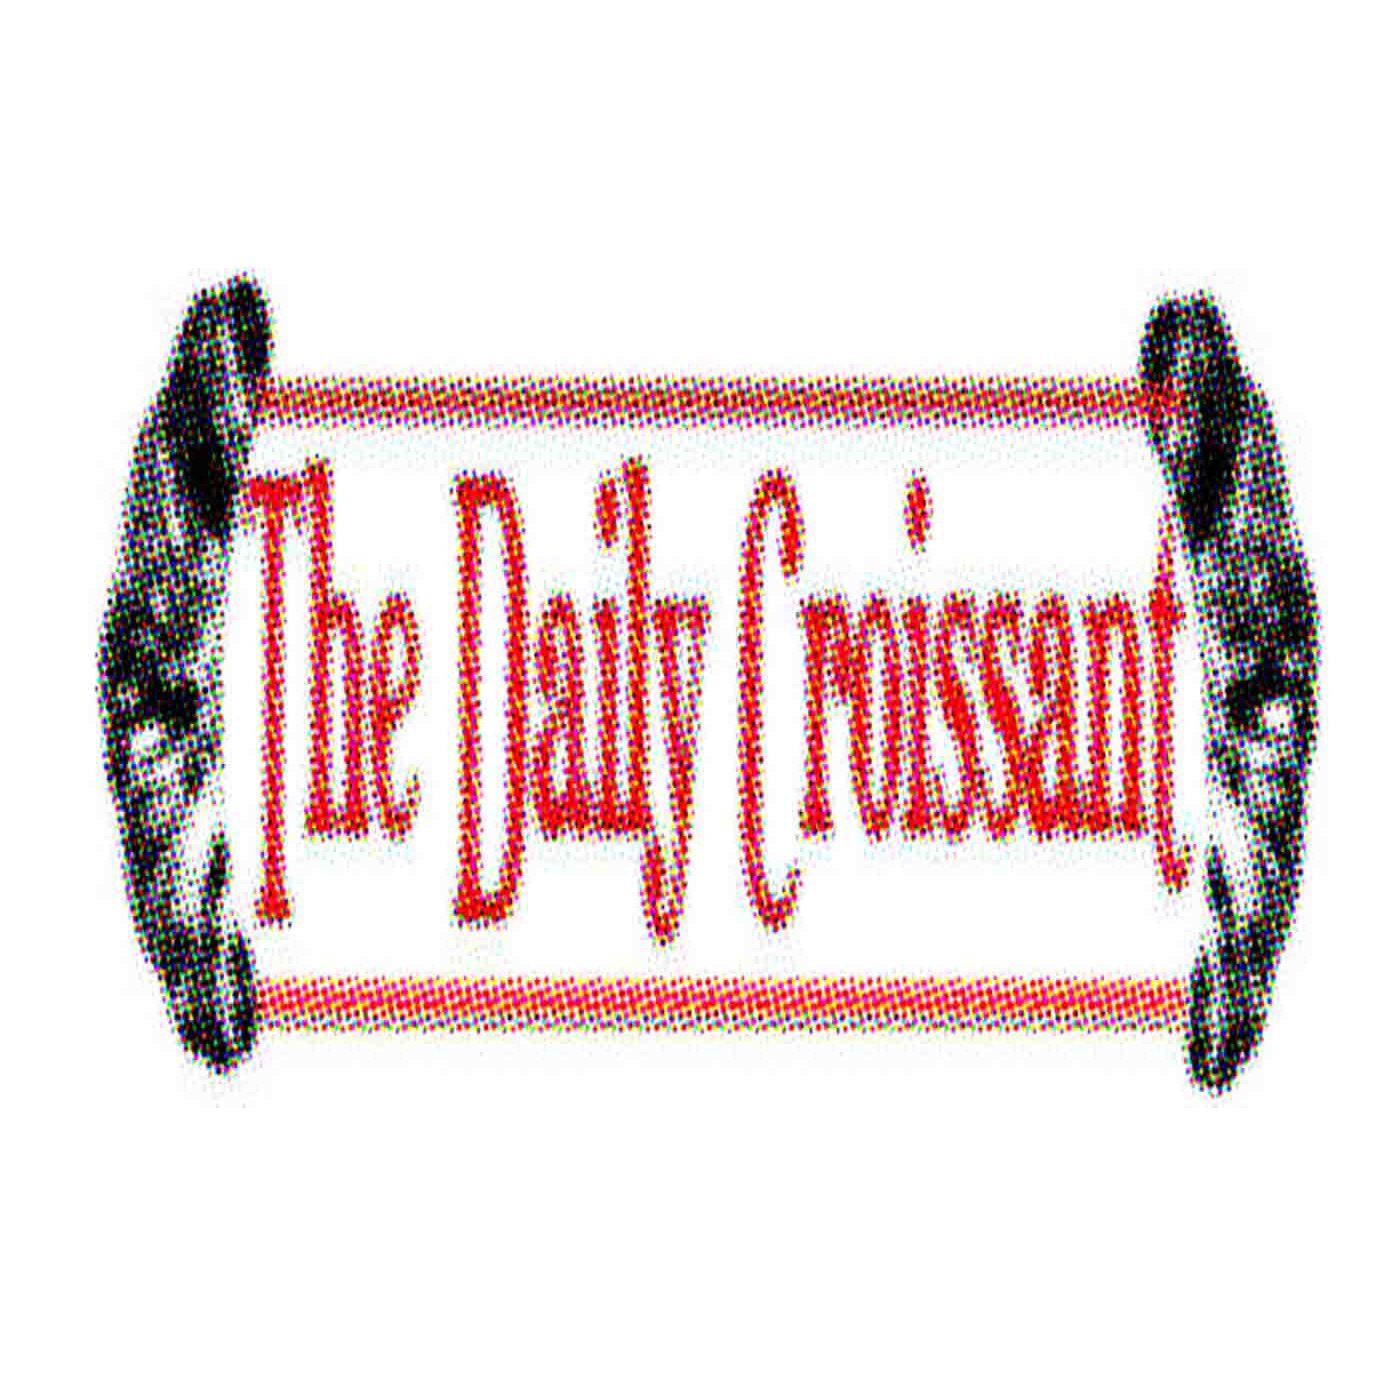 THE NEW DAILY CROISSANT